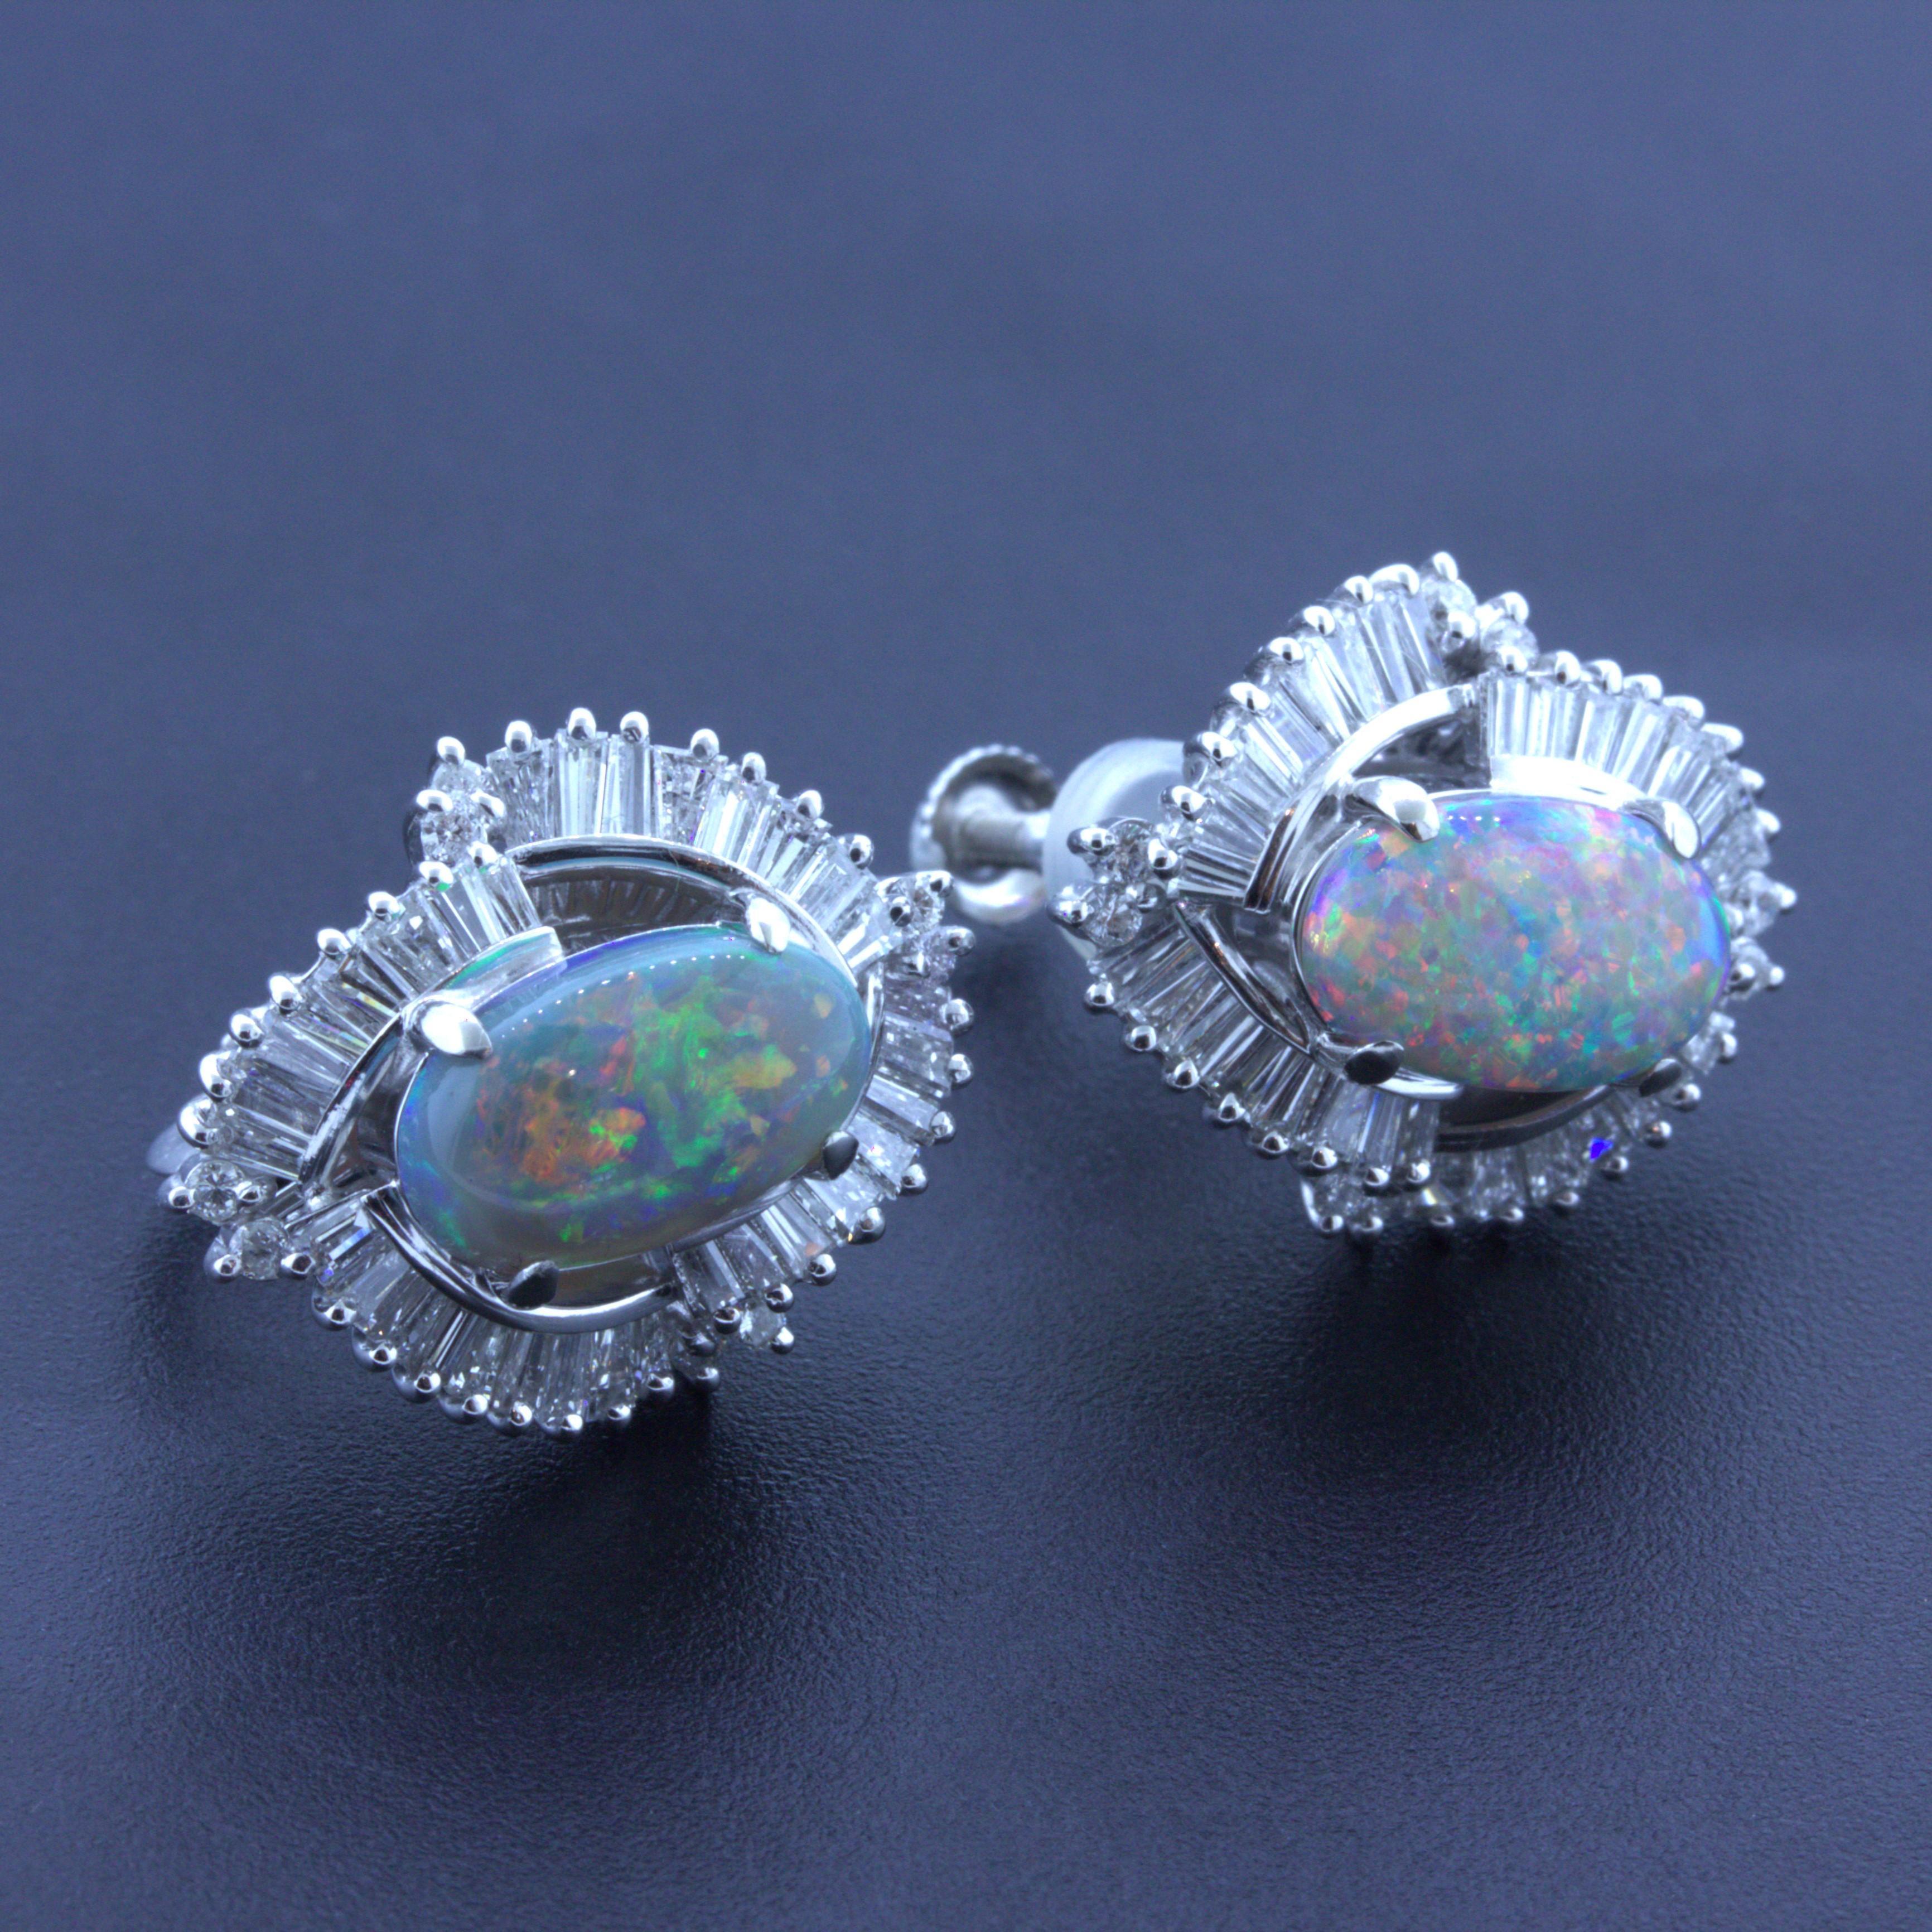 A sweet and stylish pair of Australian black opal earrings. The opals weigh a total of 3.72 carats and have great play-of-color as flashes of red, green, blue, yellow and orange can be seen across the two stones. They are complemented by 1.73 carats